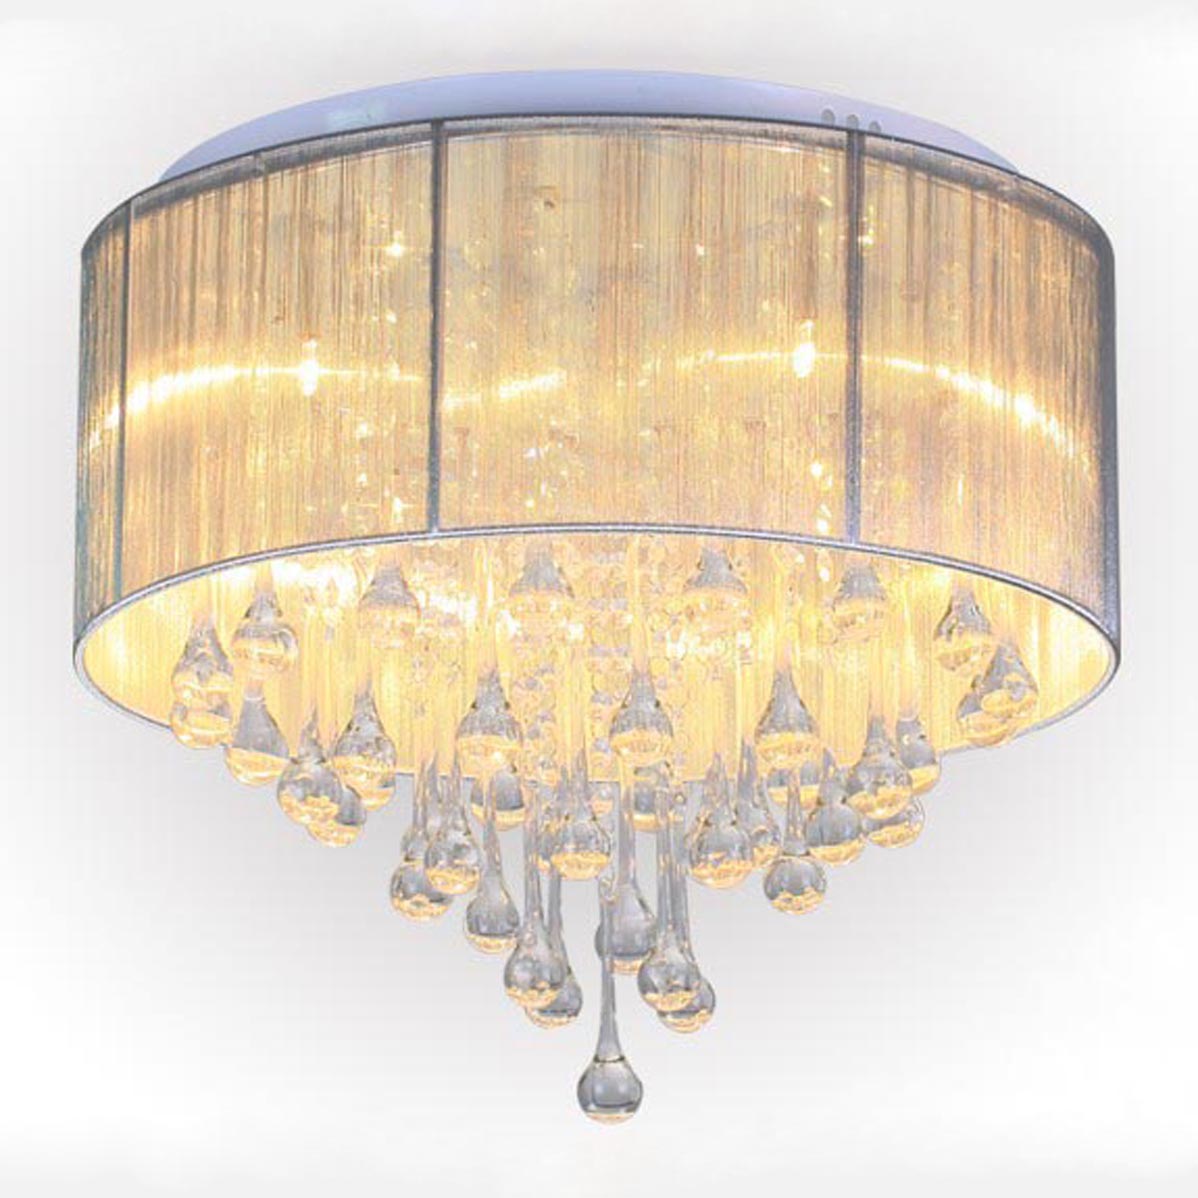 new novel design ceiling lamp HL-9512-4X-1.new novel design ceiling lamp HL-9512-4X                           2.Nice appearance, favorable optical design                       3.Shipping freight are quoted under your requests                       4.We will provide perfect after-sales service                       5.Good quality: use superior material, the complete fixture can meets the international standard                       3.Beautiful and Various colors                     4.High quality and Durability